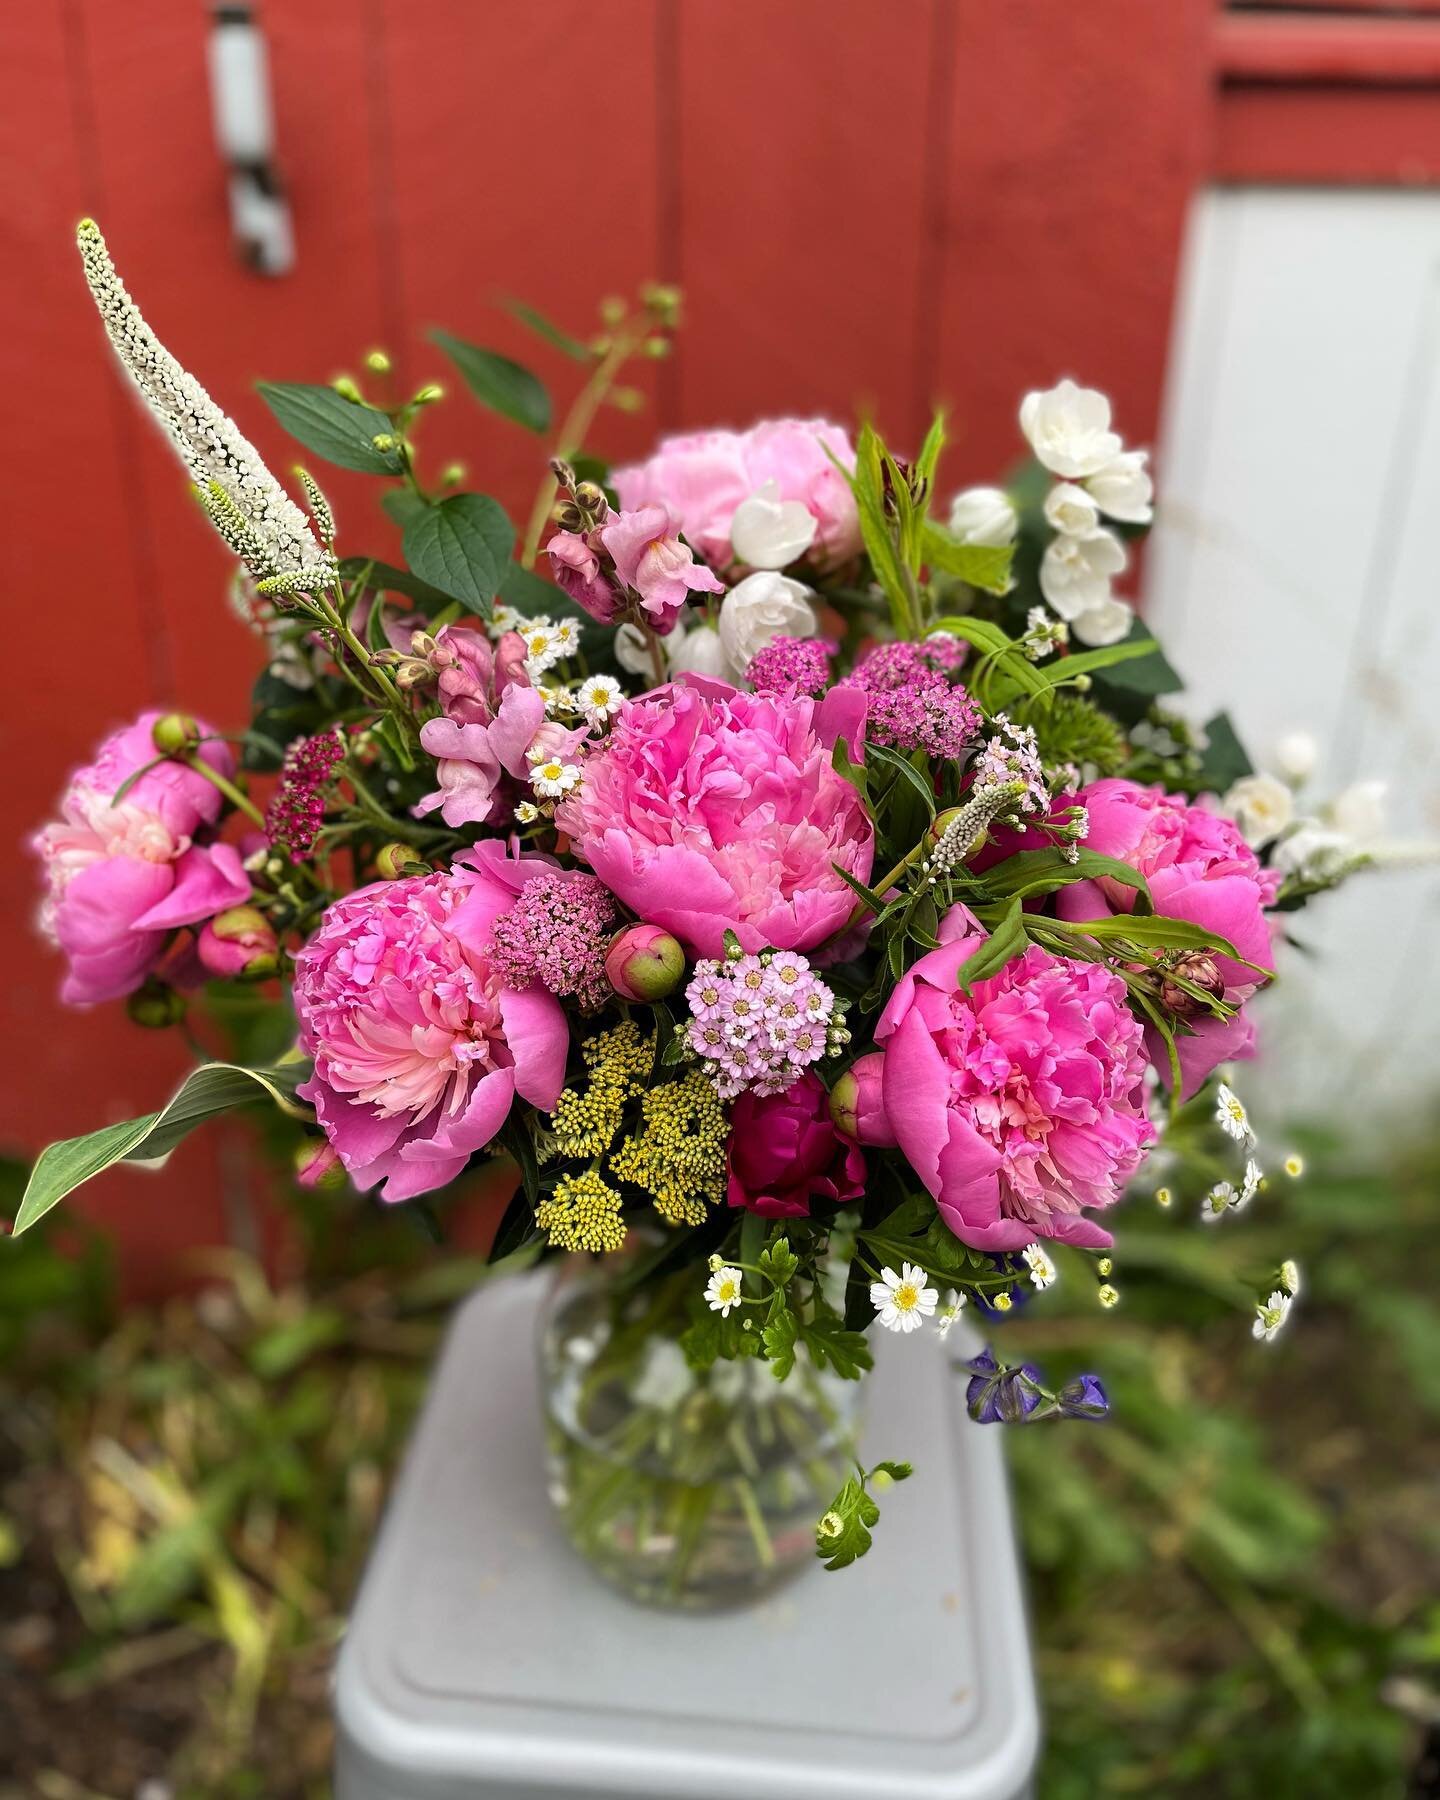 We&rsquo;ve been fortunate to share our flowers with friends marking personal milestones these past few weeks. Some have been joyous celebrations, while others were more emotion-filled gatherings marking the lives of extraordinary loved ones. All wel